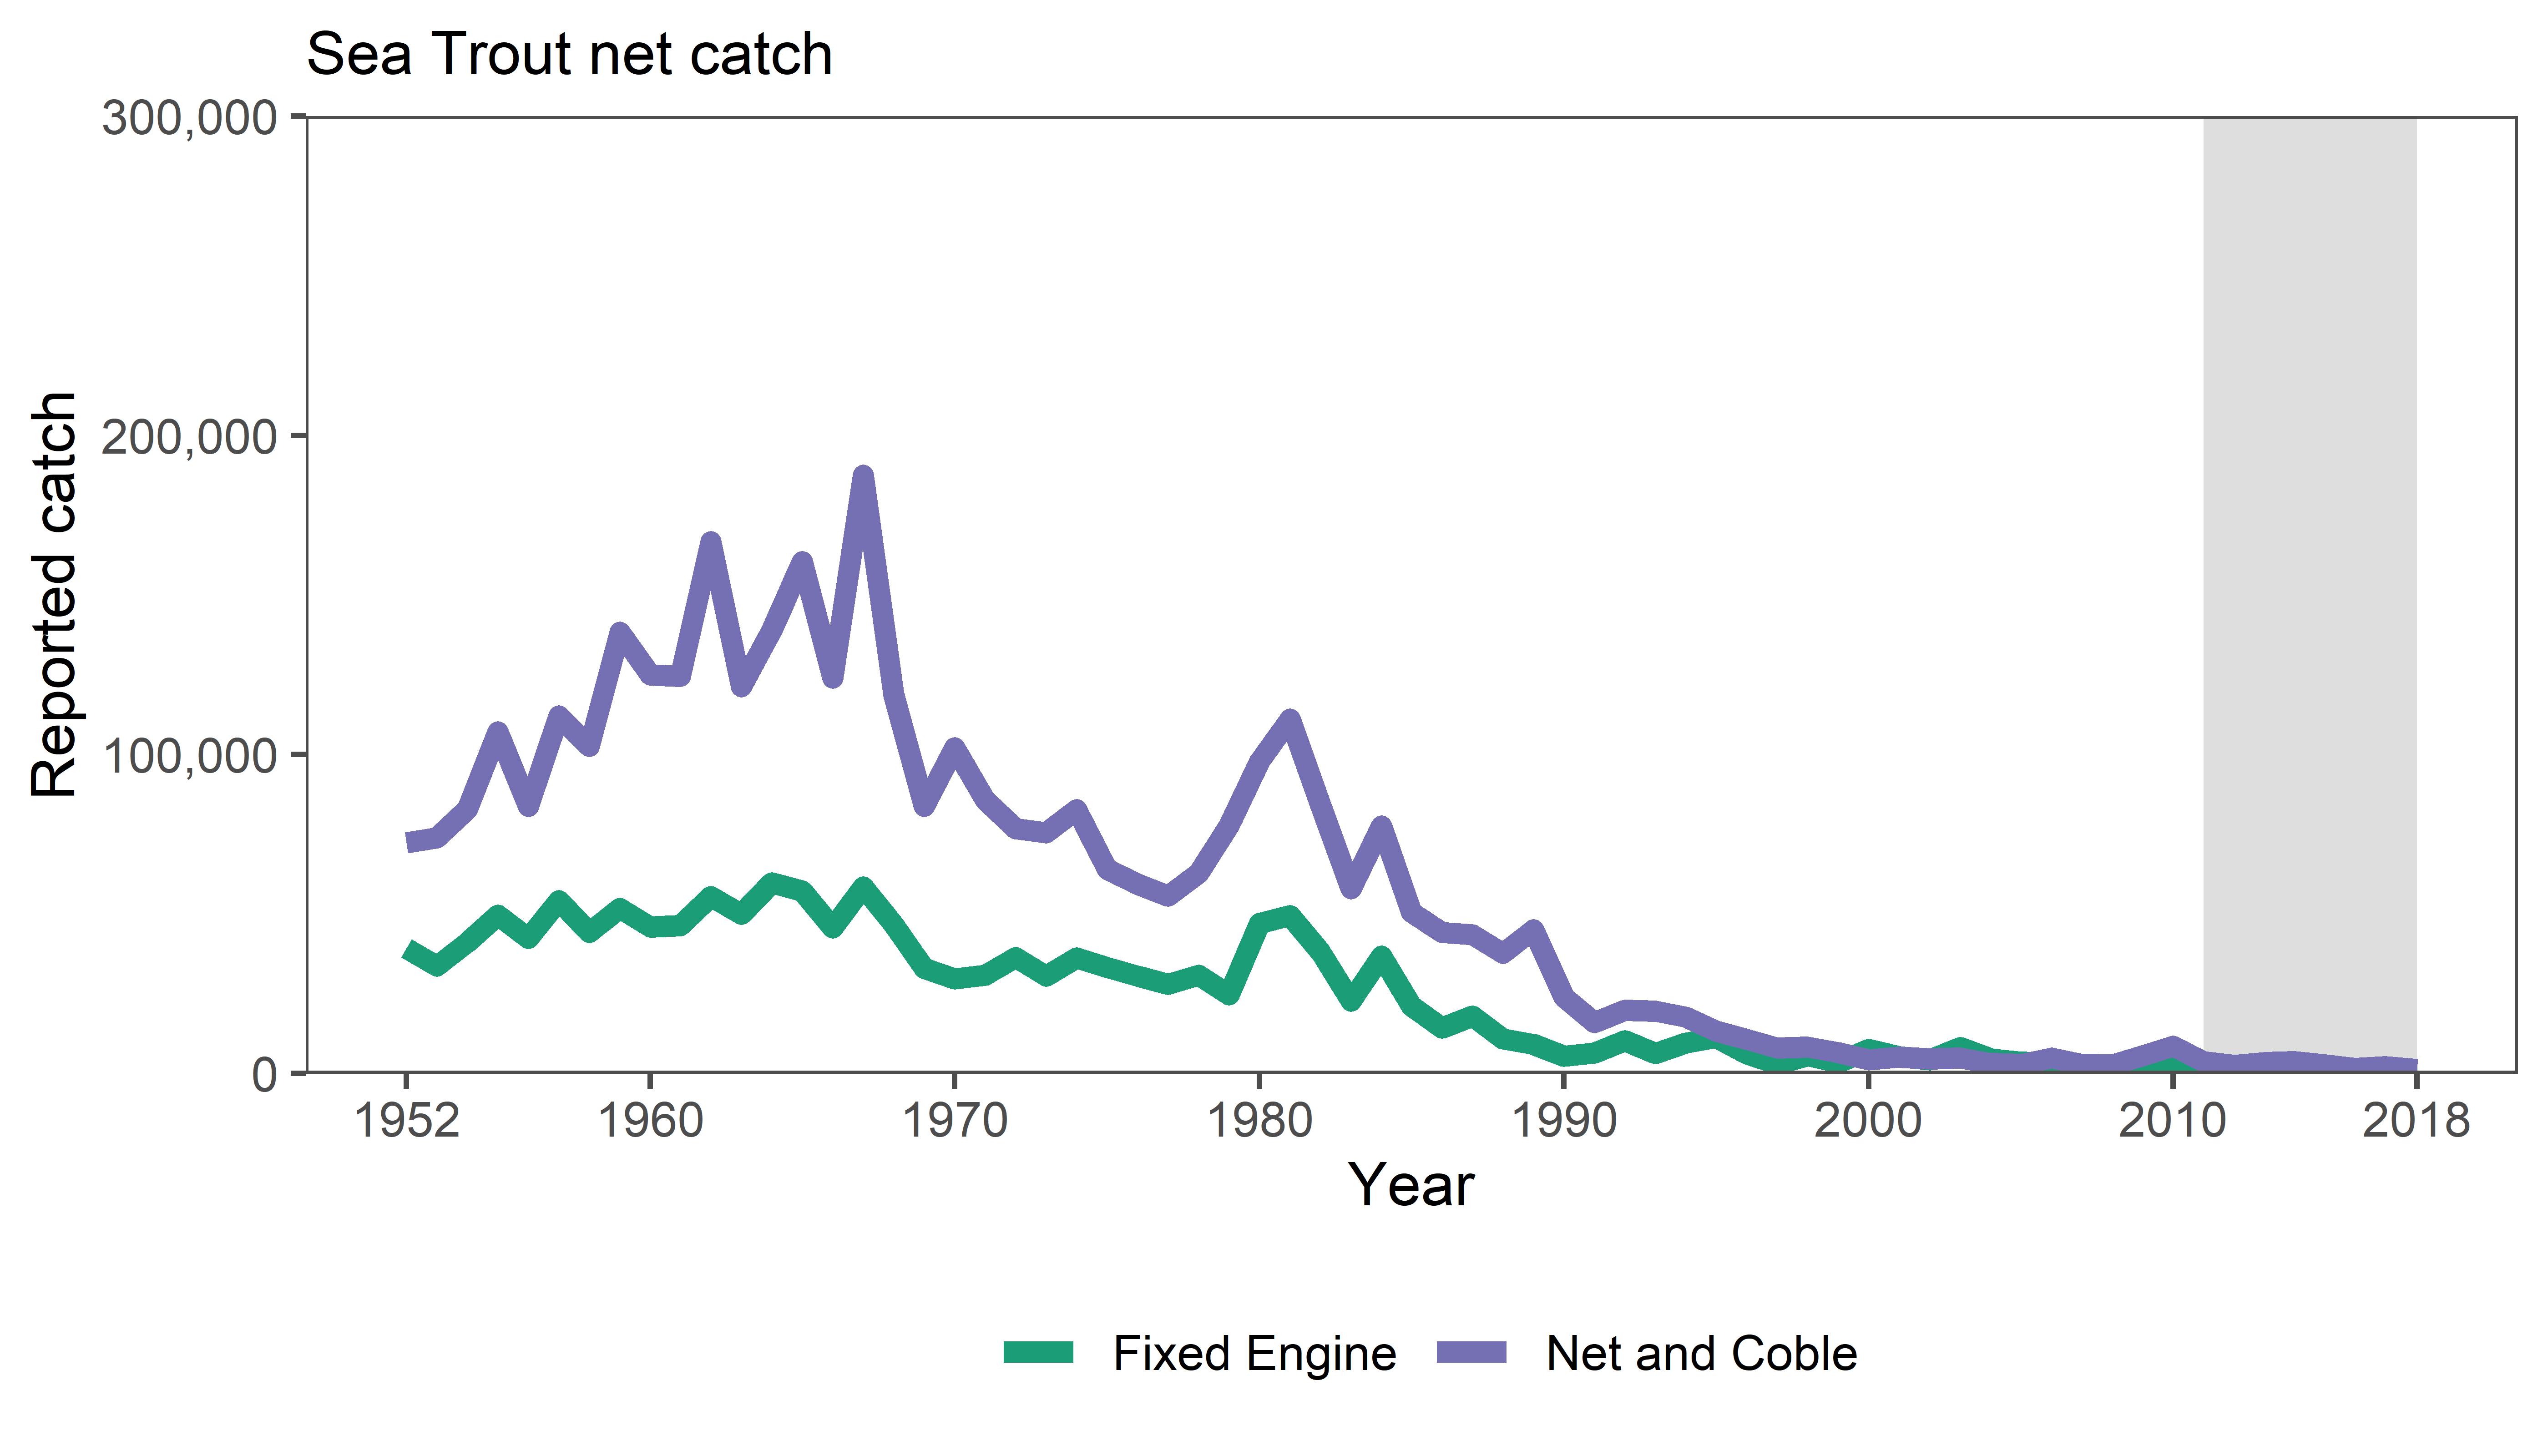 Figure 4: Reported catches of sea trout from the fixed engine and net and coble fisheries in Scotland 1952 to 2018. Source: Marine Scotland